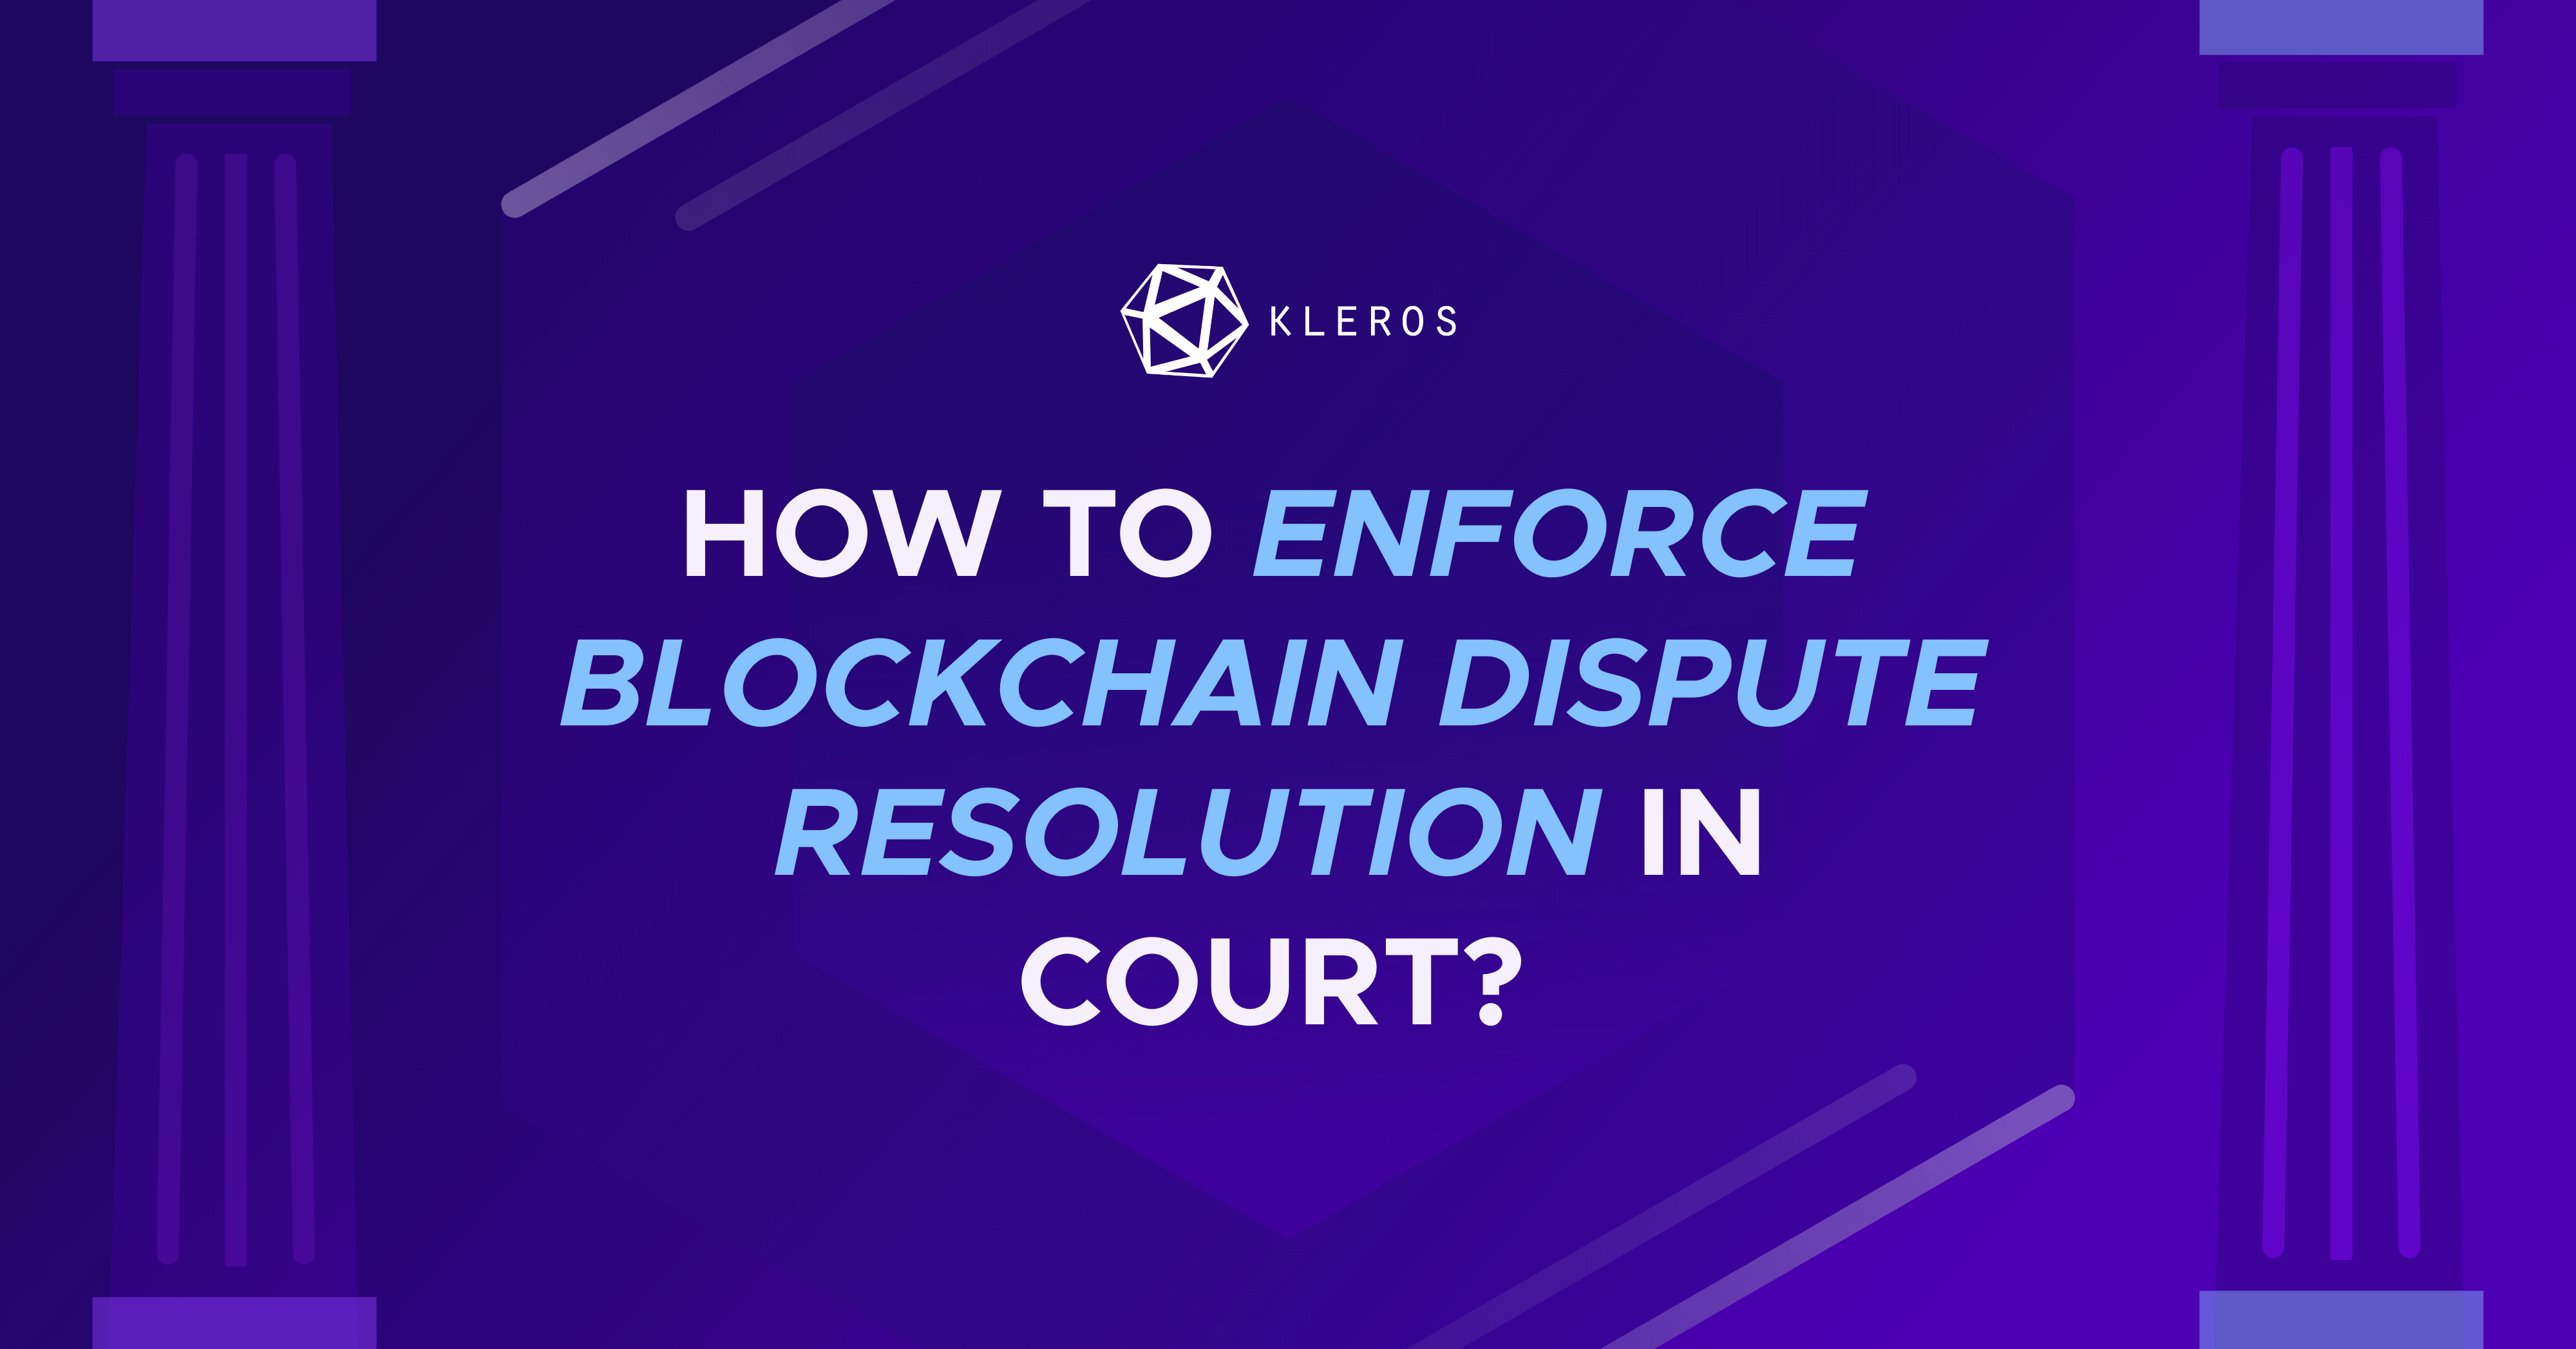 How to Enforce Blockchain Dispute Resolution in Court? The Kleros Case in Mexico